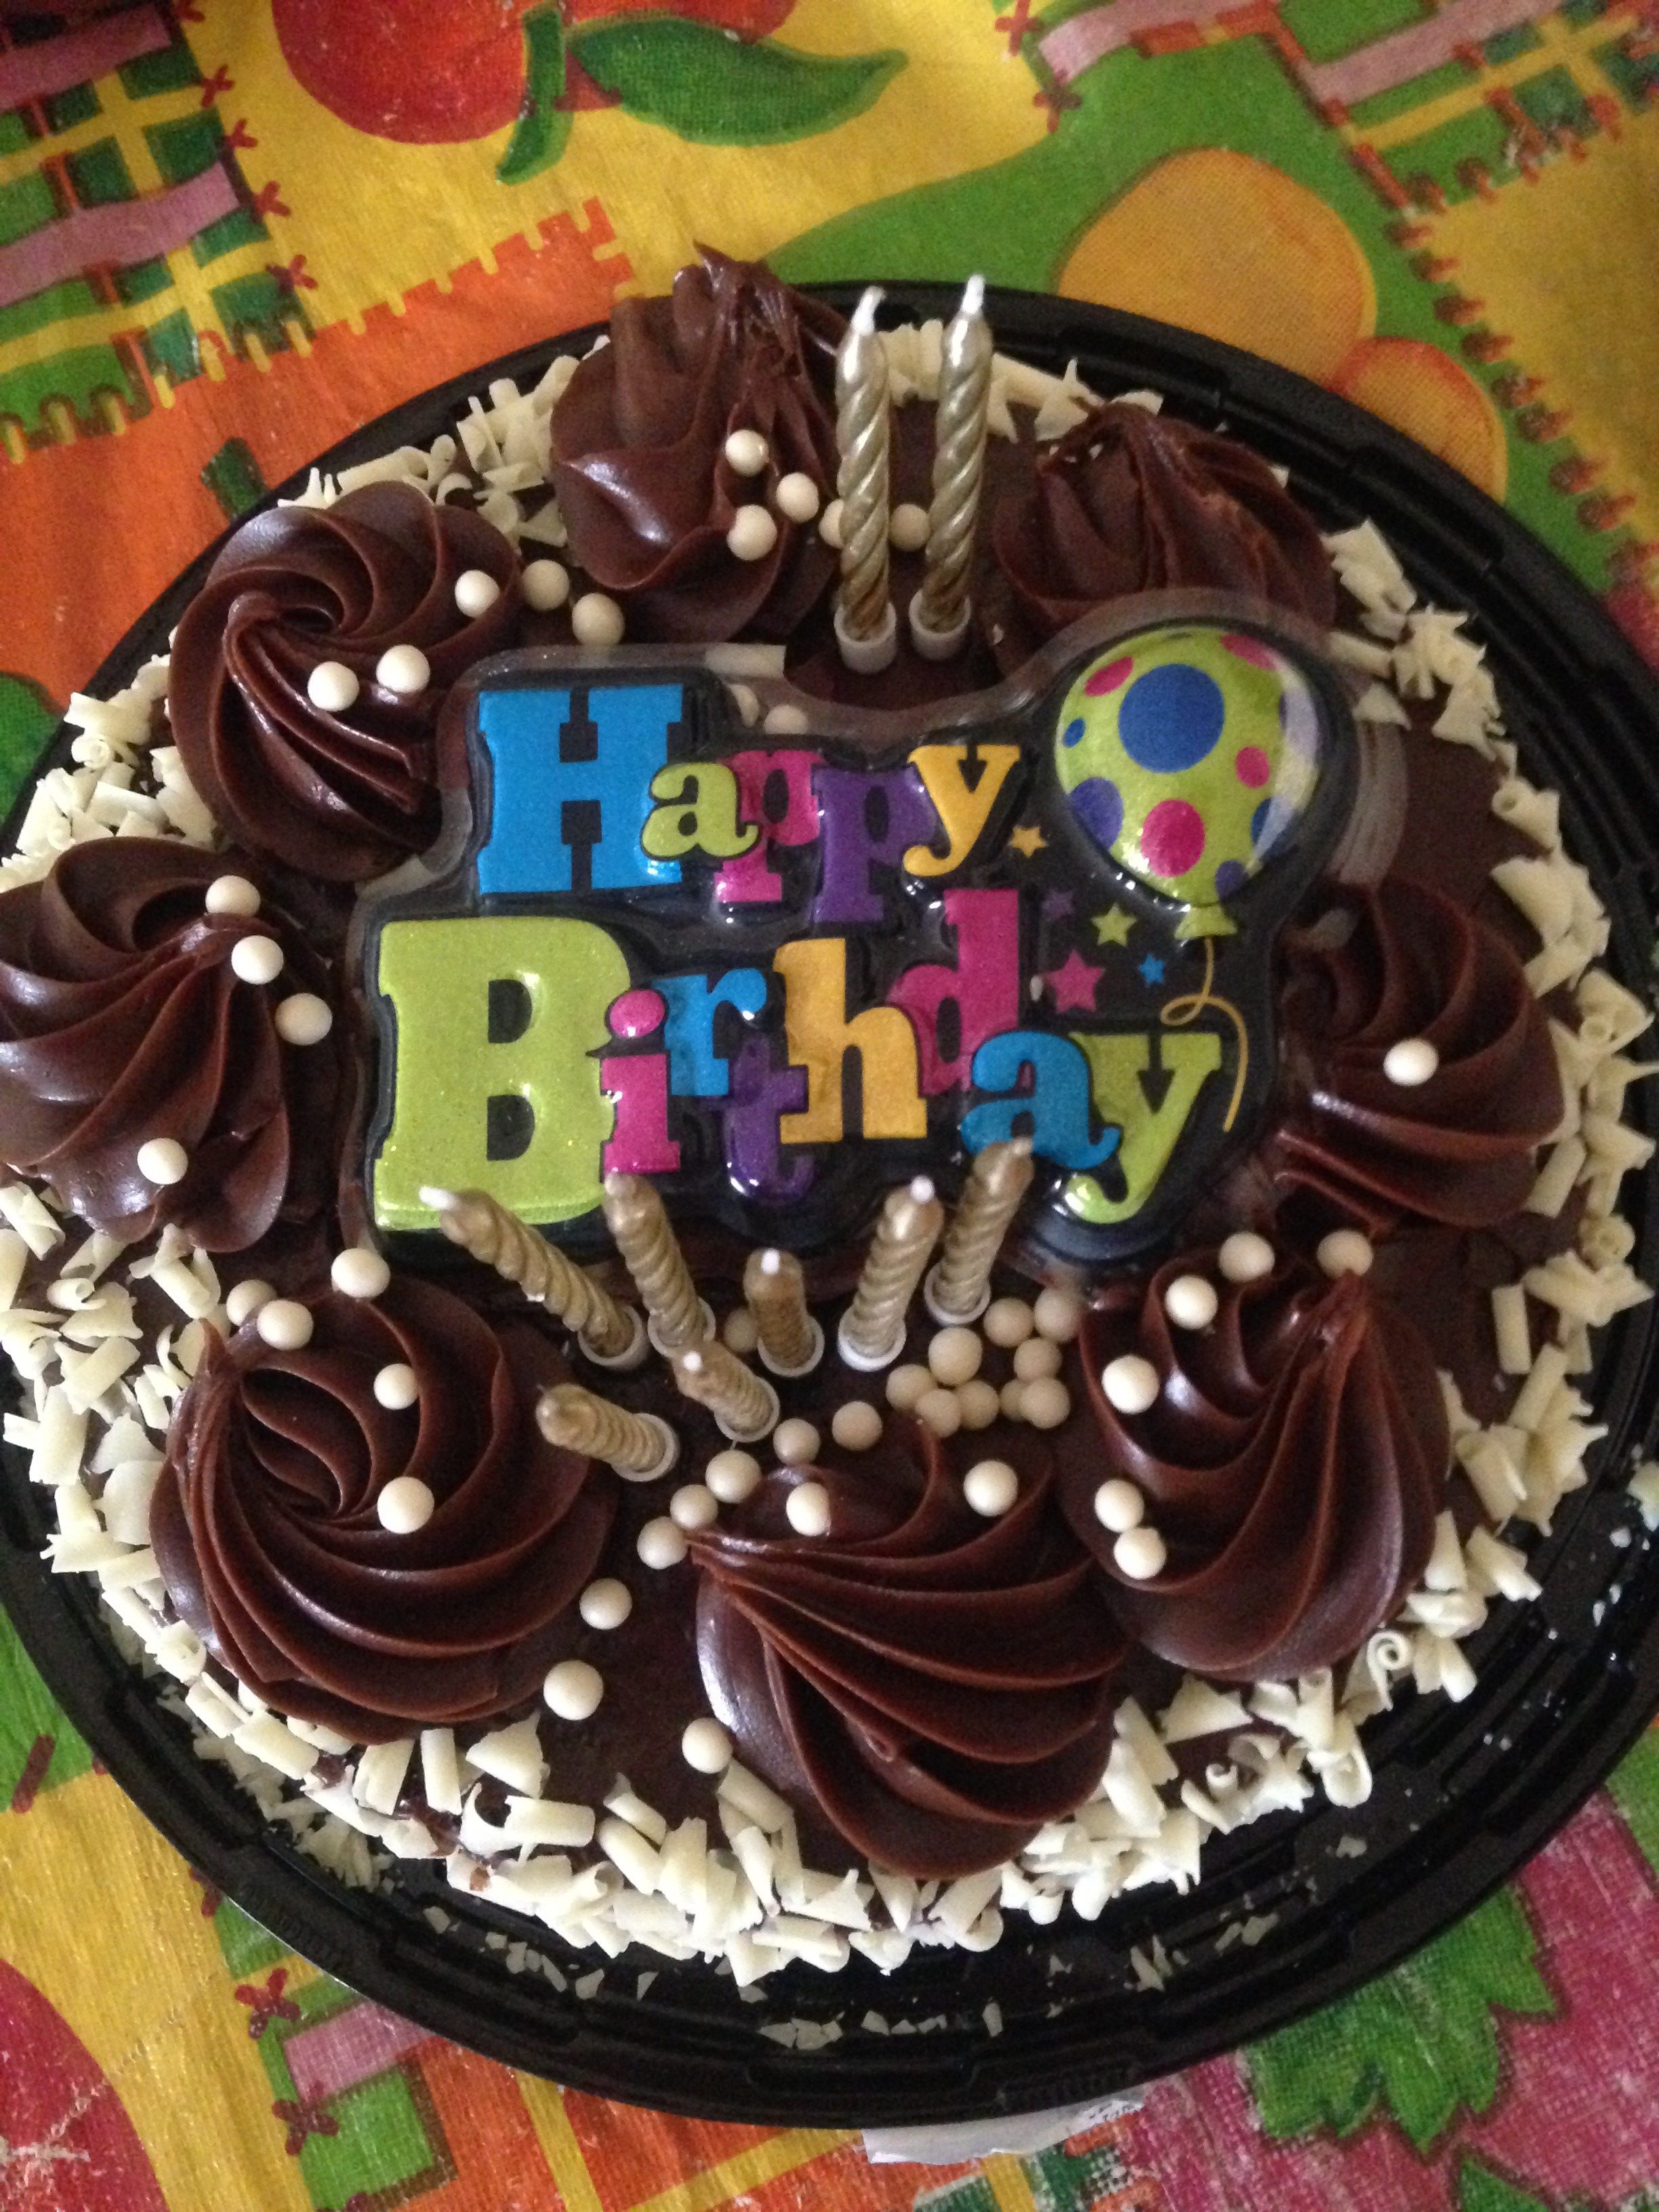 A chocolate birthday cake with Happy Birthday writing and sprinkles on top.